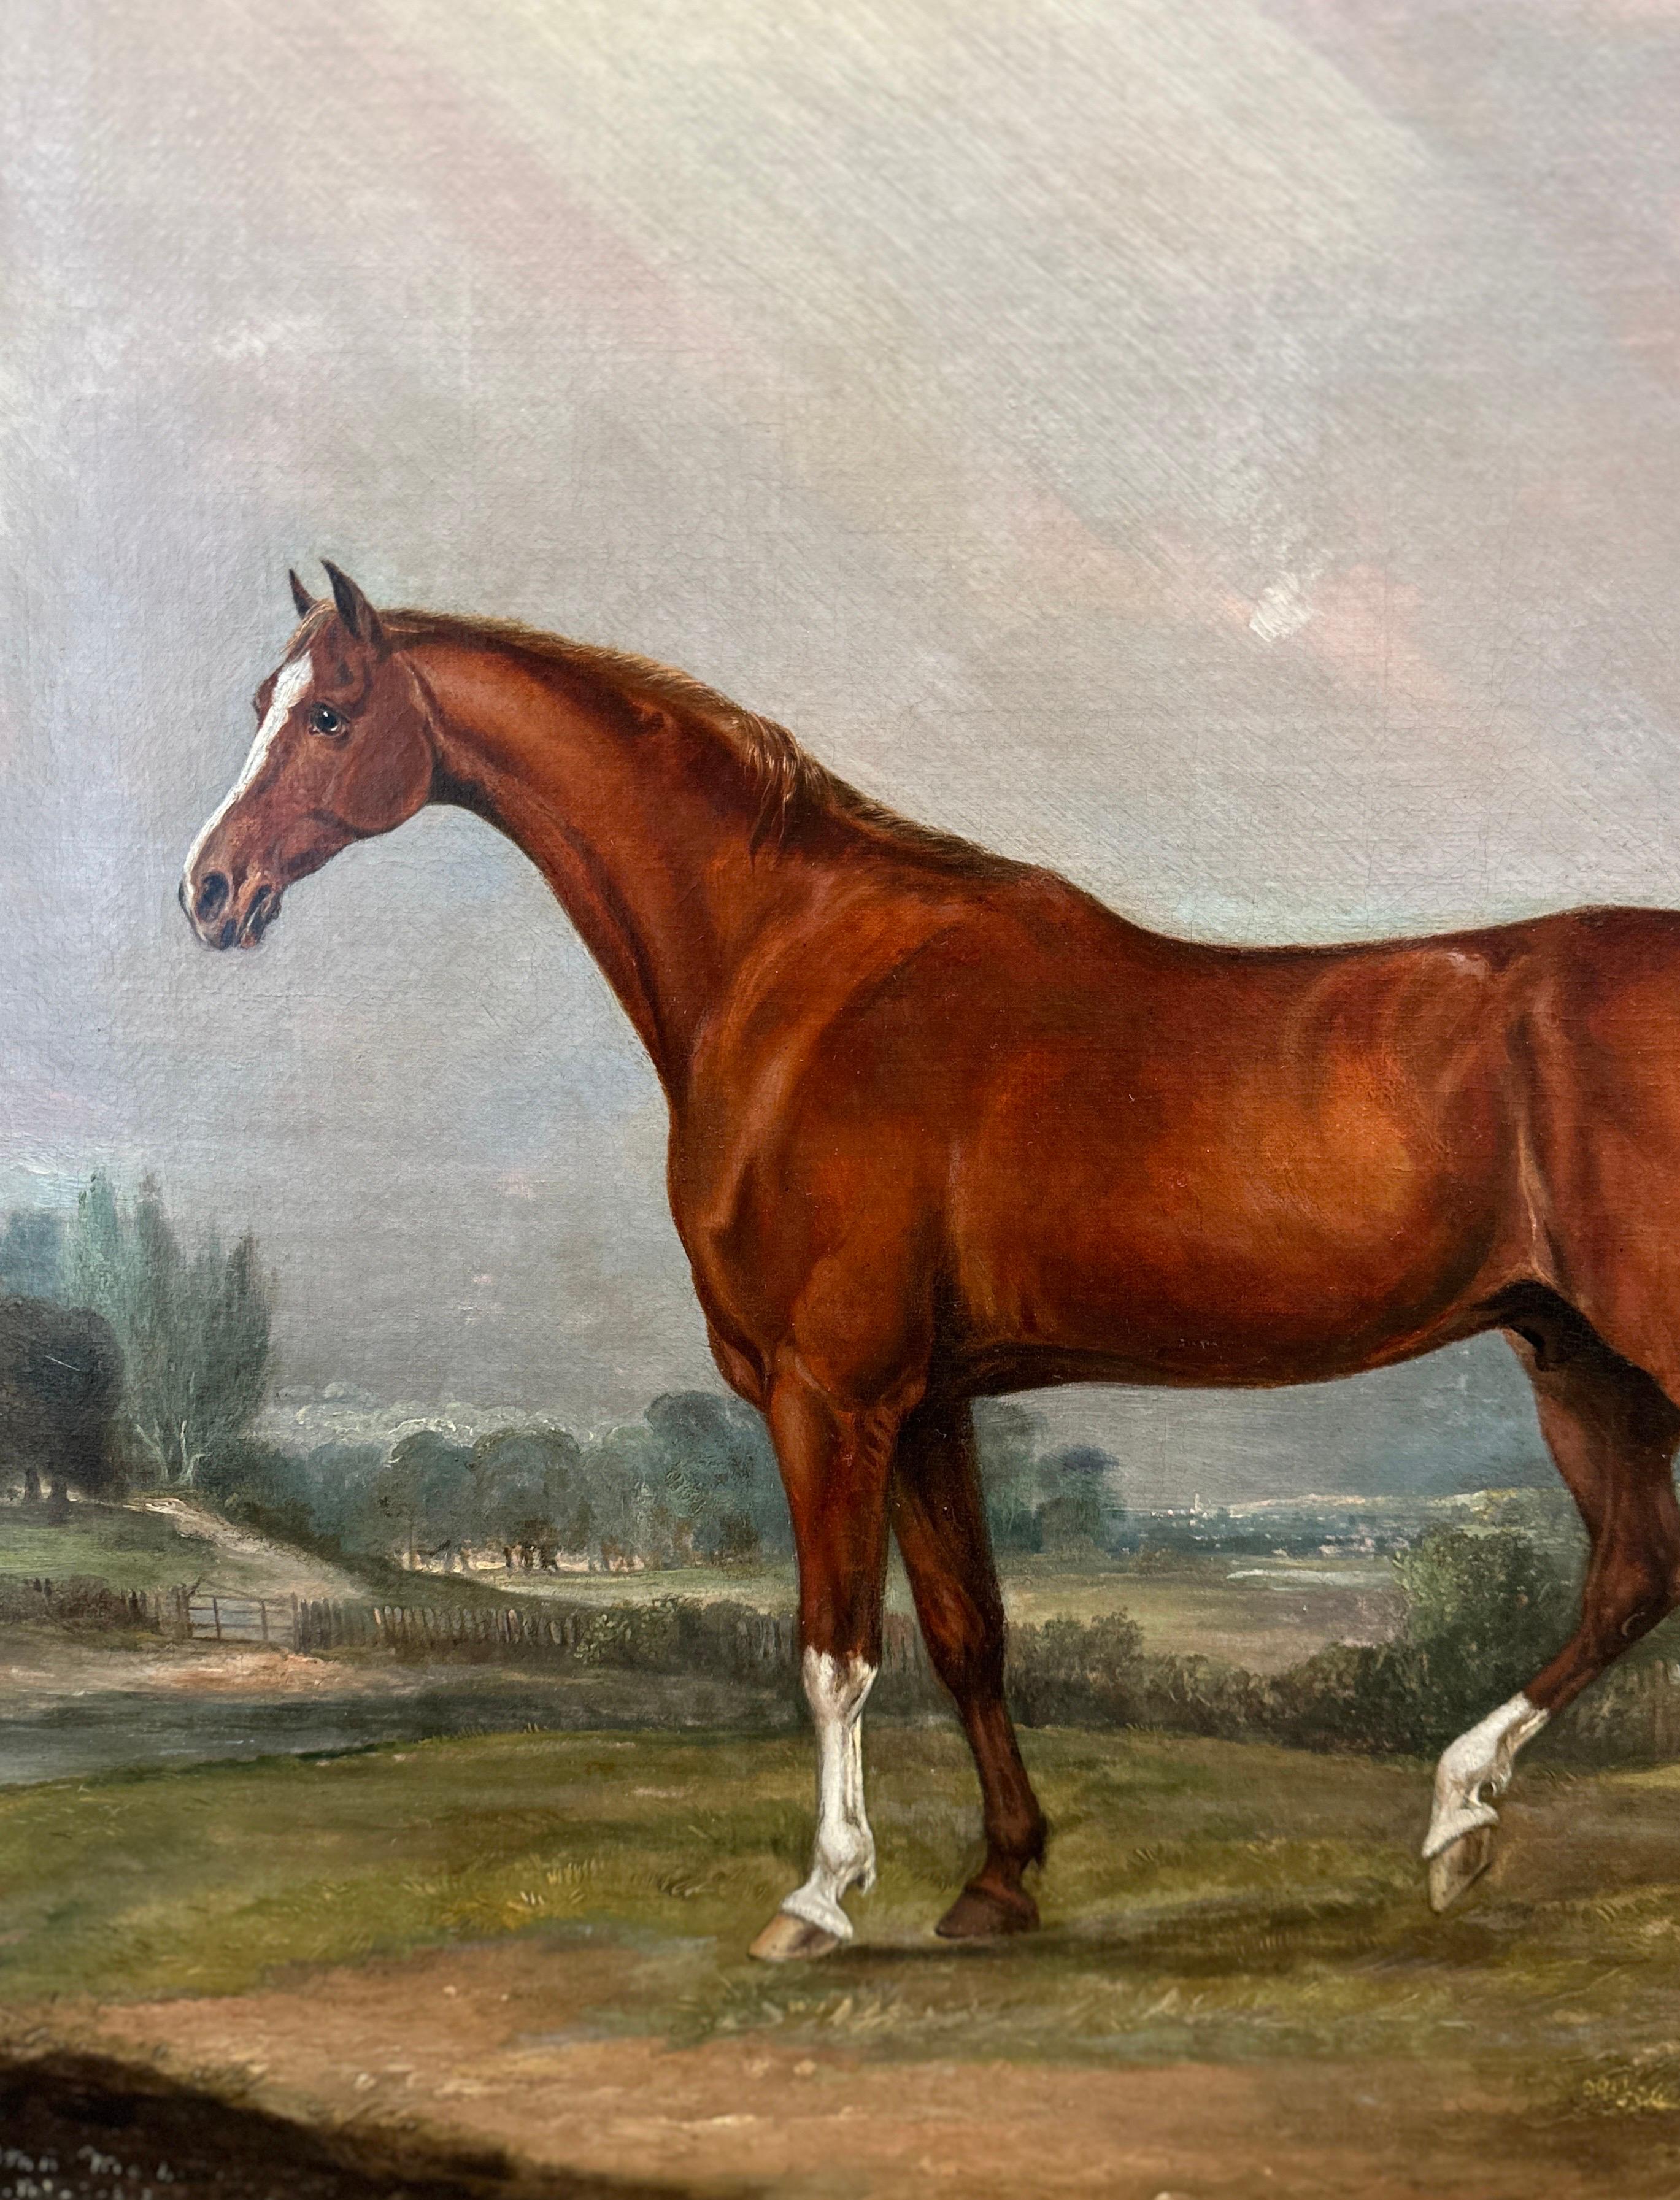 A painting of a chestnut hunter in a landscape with a horse and rider accompanied by two hounds by a woodland river in the distance.

Signed and inscribed 'Melton Mowbray', lower left. 

Oil on canvas in a giltwood frame.

 John Ferneley Sr